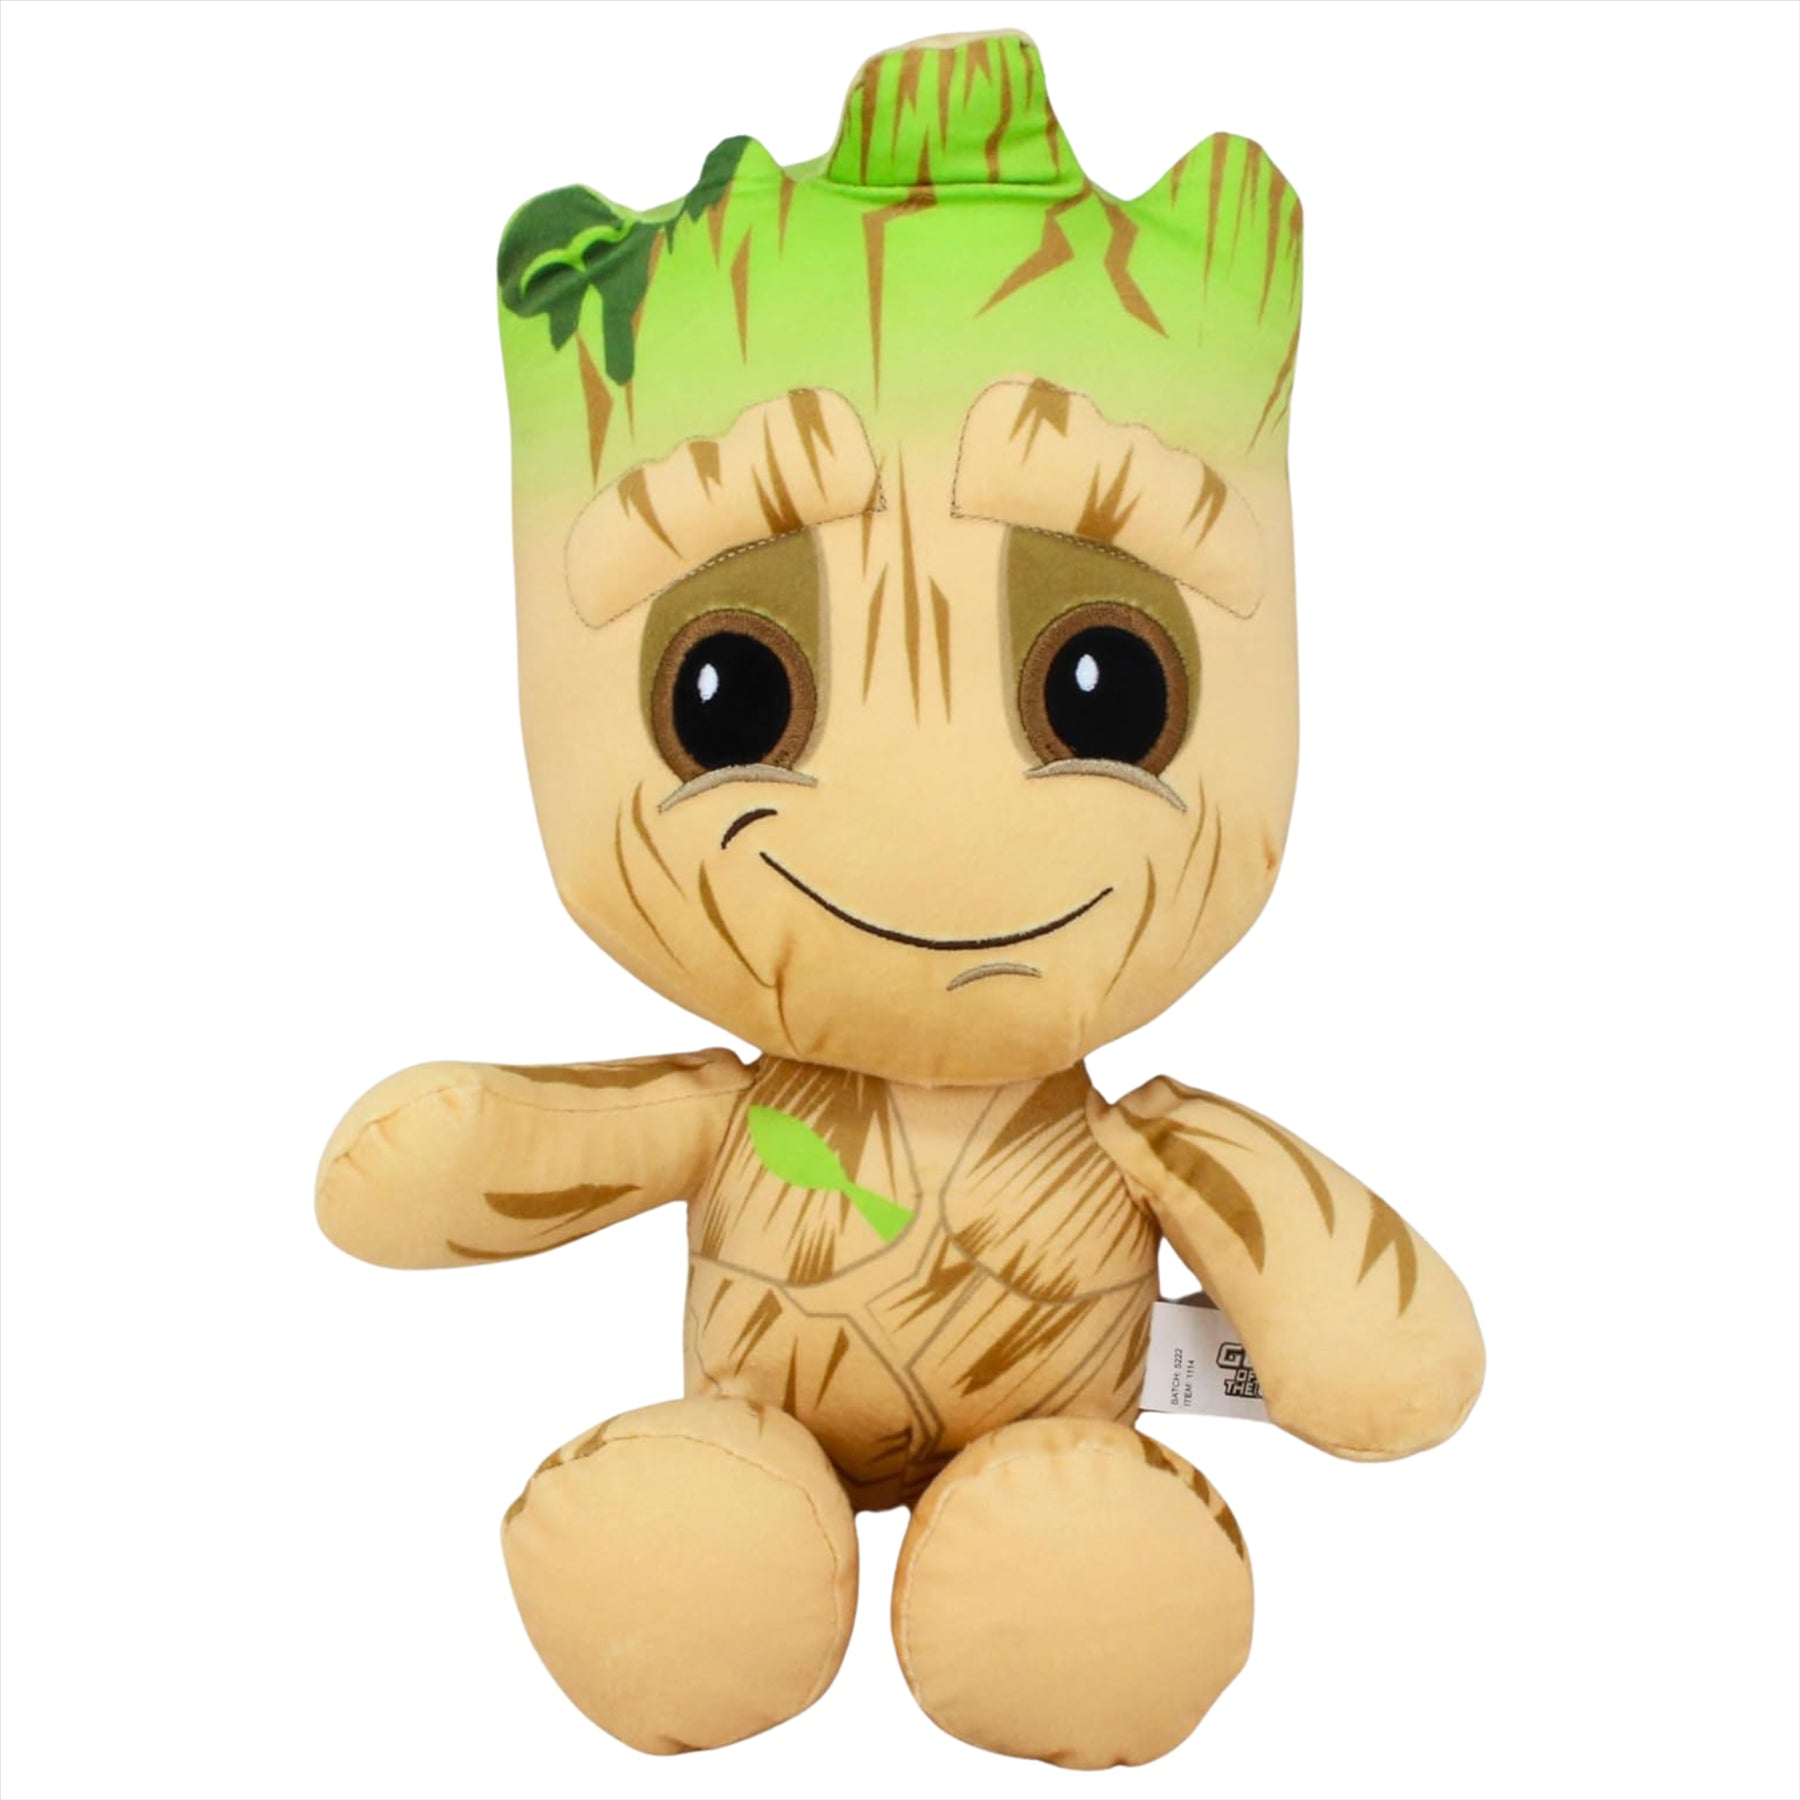 Guardians of the Galaxy Avengers Groot Super Soft Embroidered 36cm Plush Toy